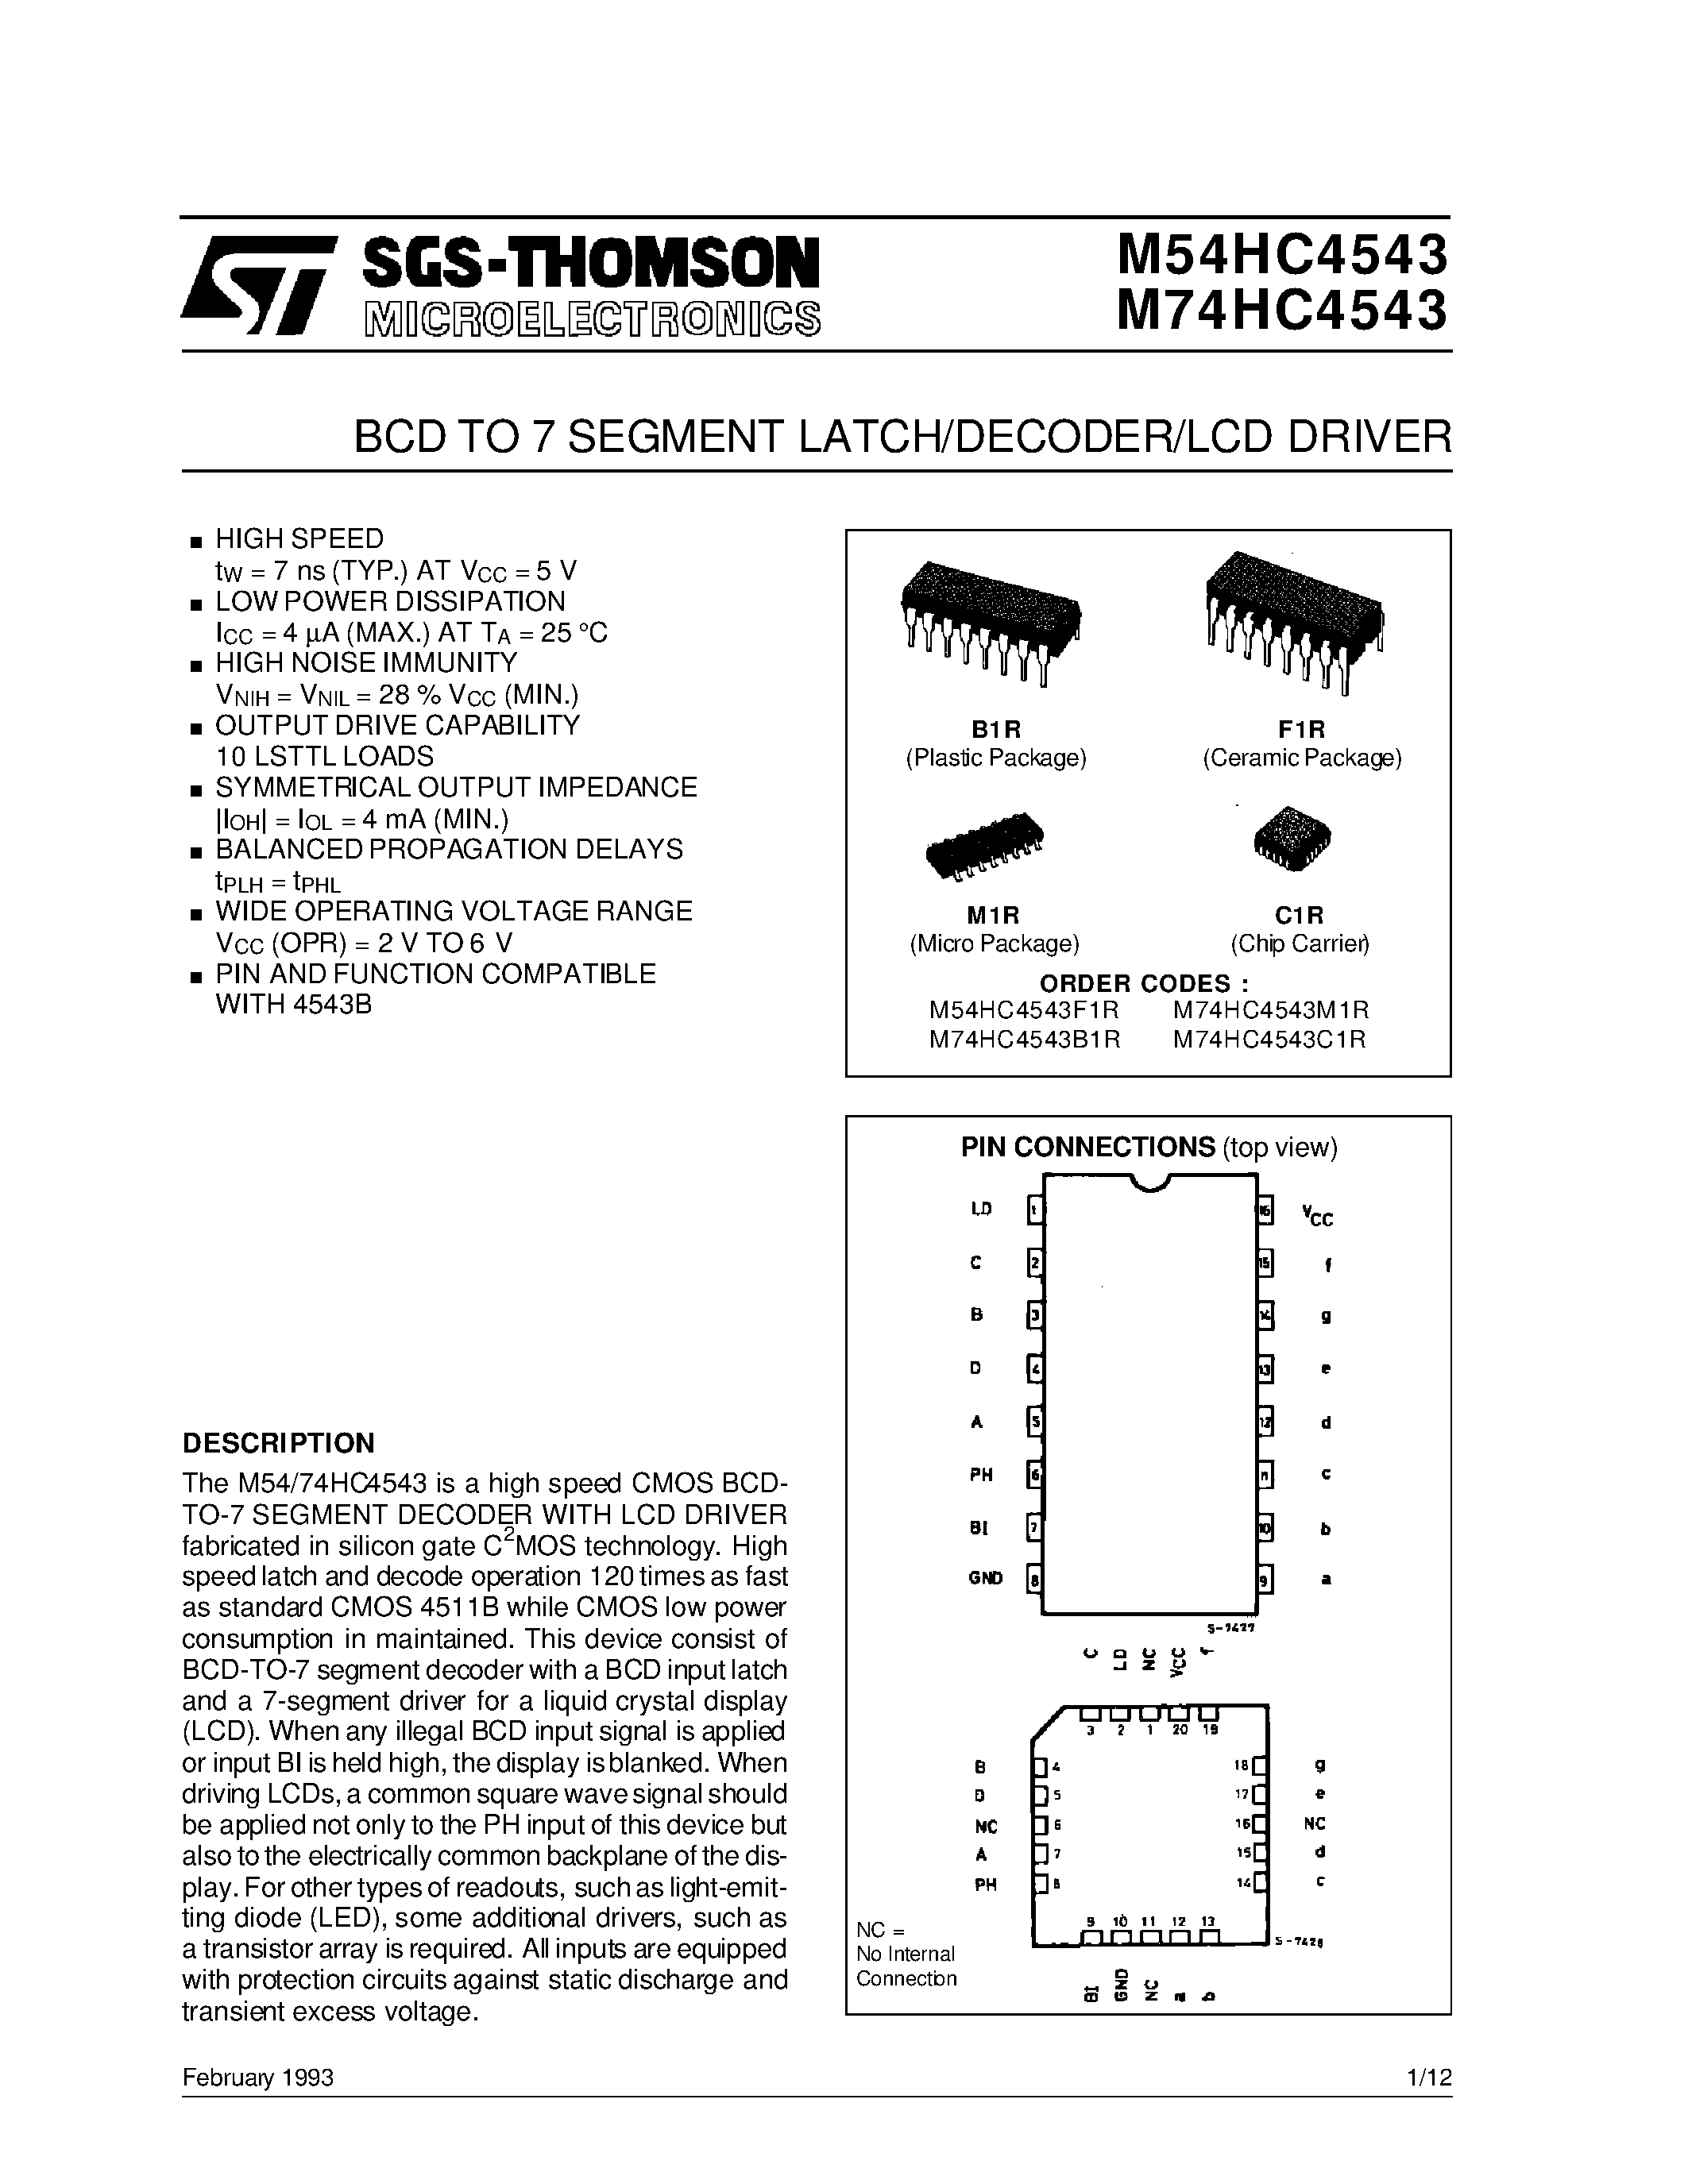 Datasheet M74HC4543 - BCD TO 7 SEGMENT LATCH/DECODER/LCD DRIVER page 1